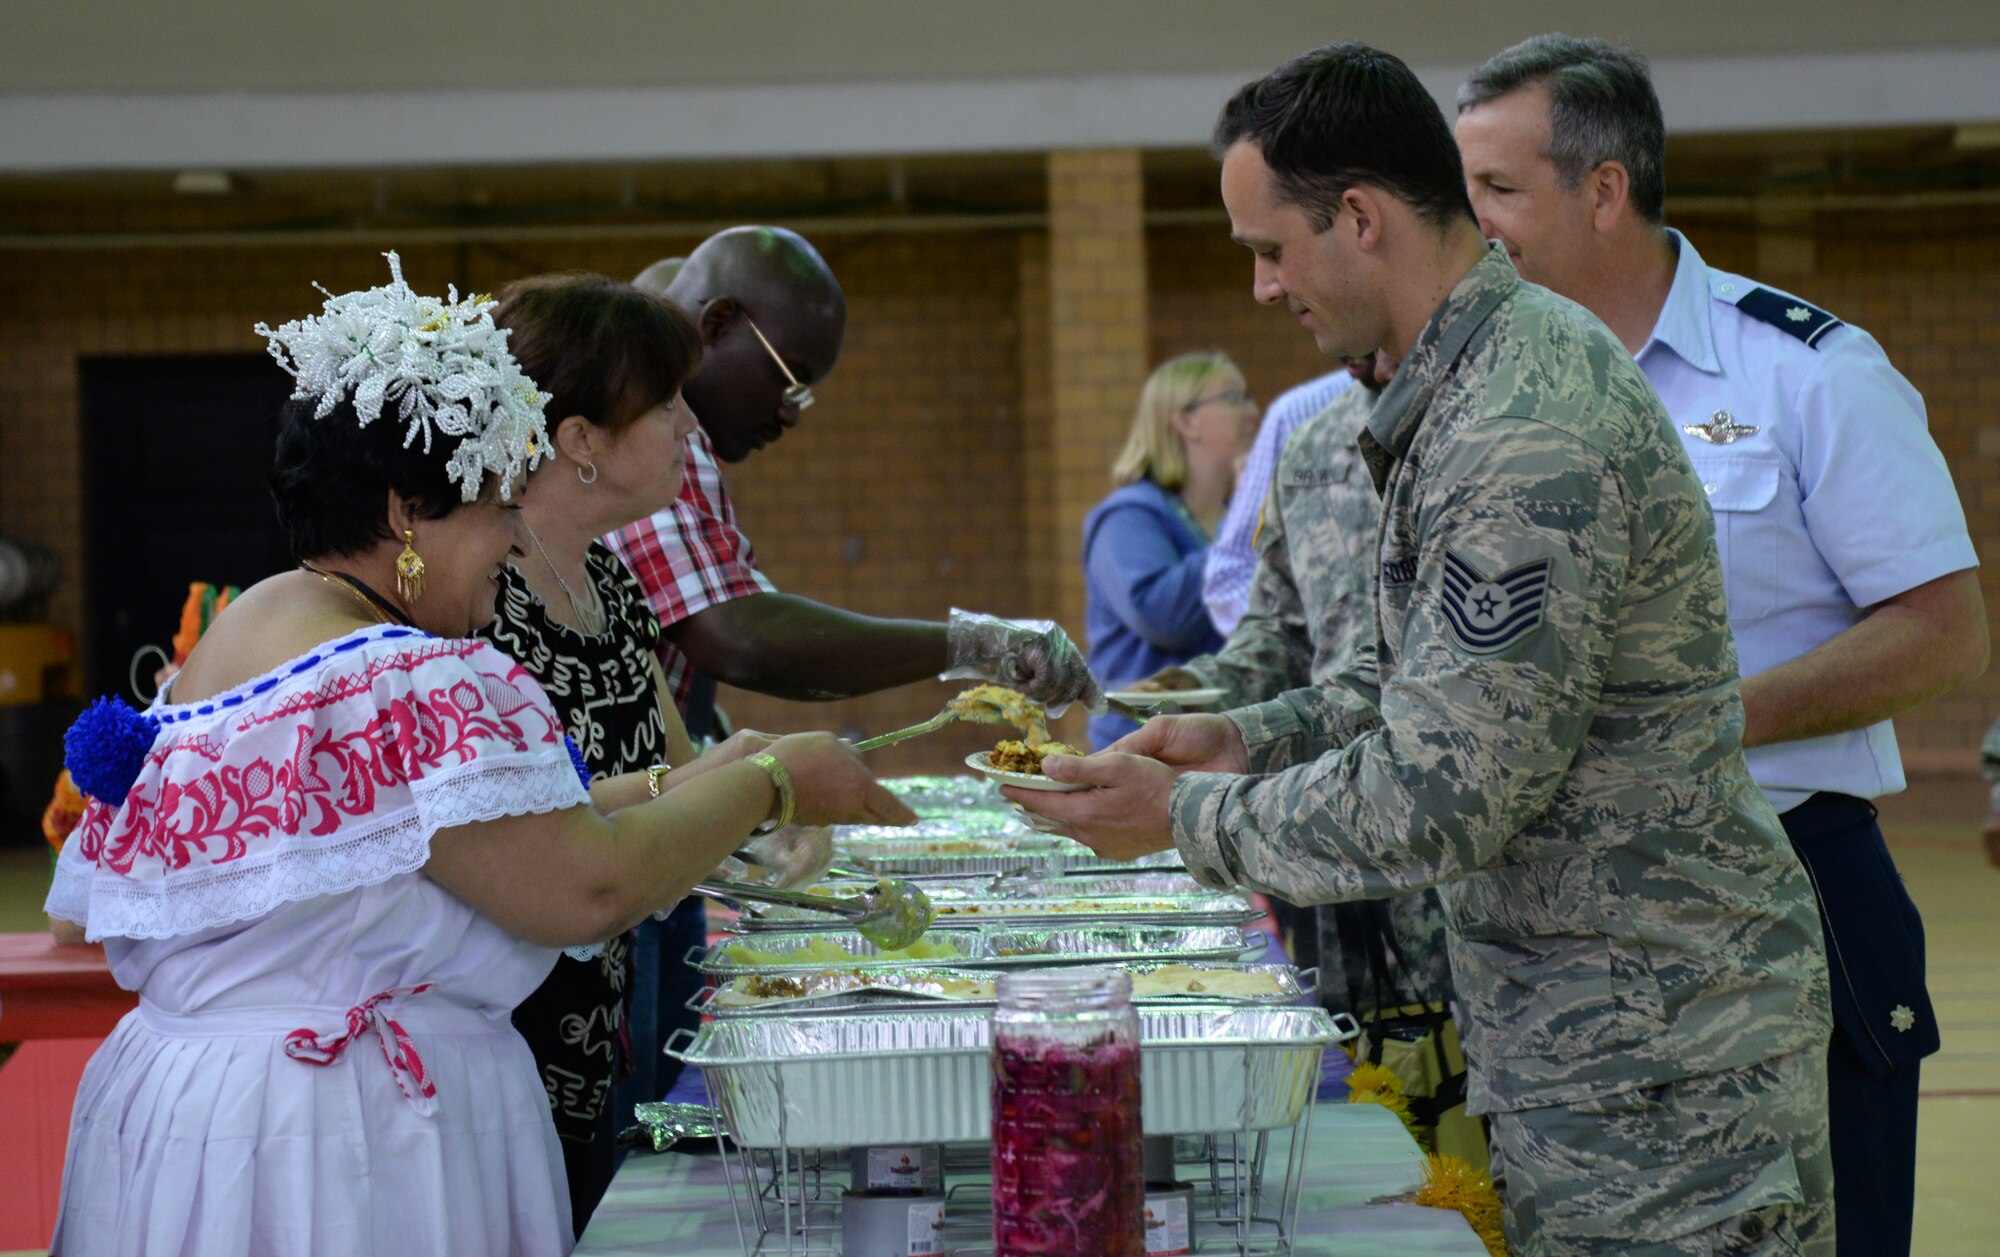 Chief Warrant Officer Jennings serves Latin American food samples at Unity Day May 21 at the 5th Regiment Armory in Baltimore. Unity Day has existed since 2006. (Photo by Airman 1st Class Enjoli M. Saunders/RELEASED)  